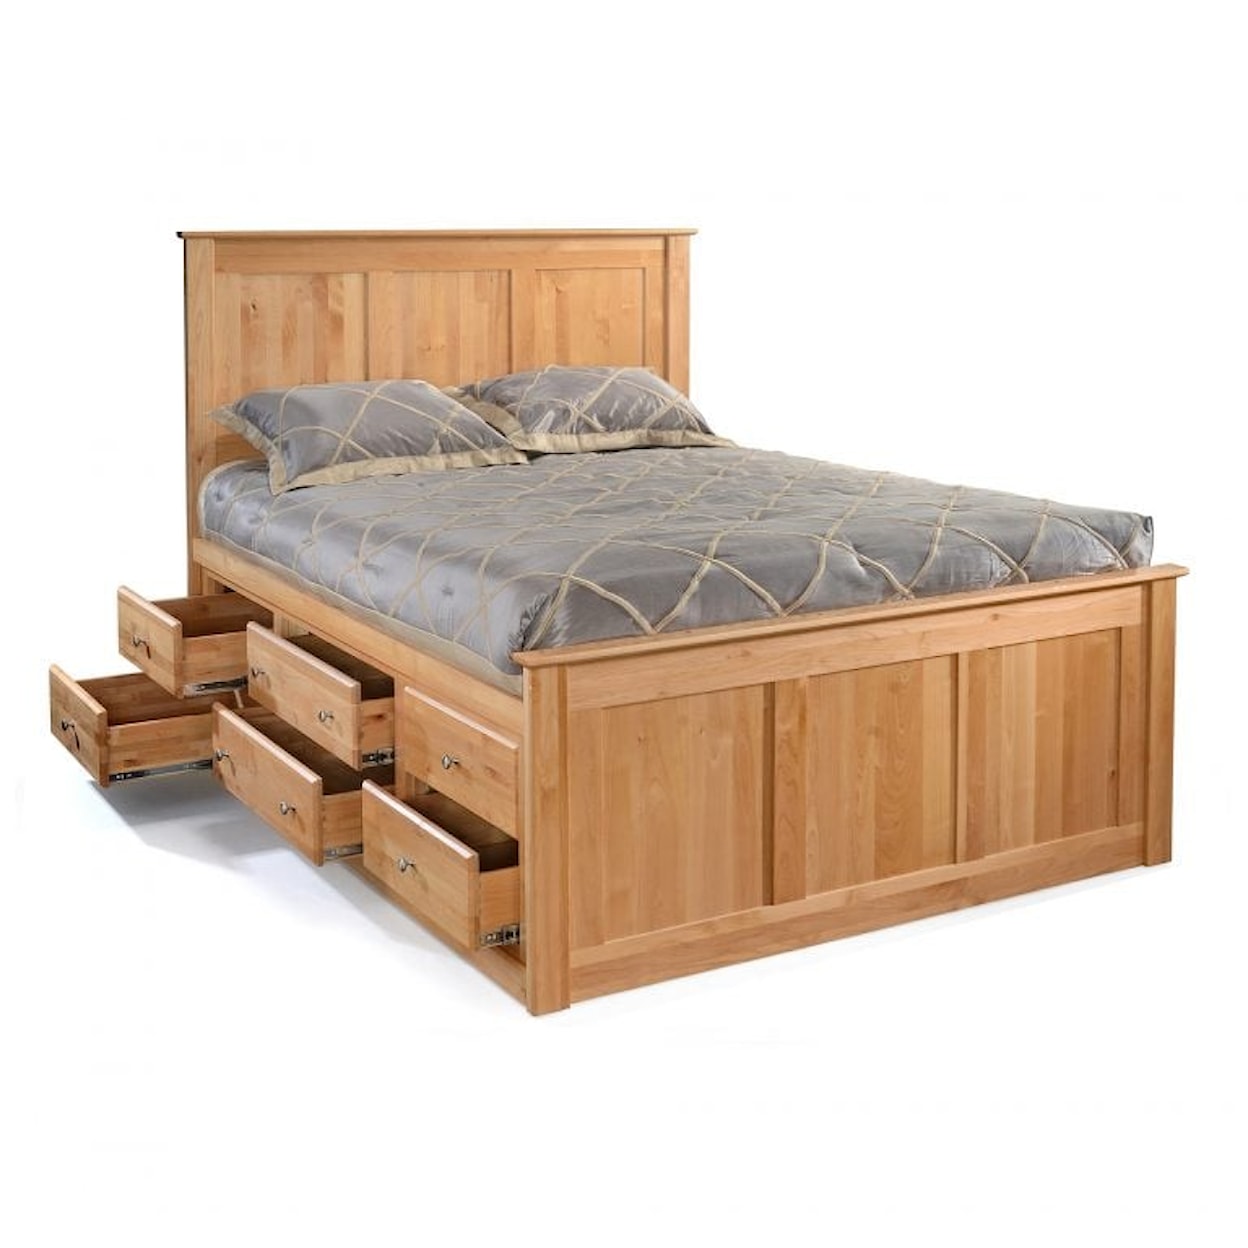 Archbold Furniture Chest Bed Cal. King 12-Drawer Chest Bed